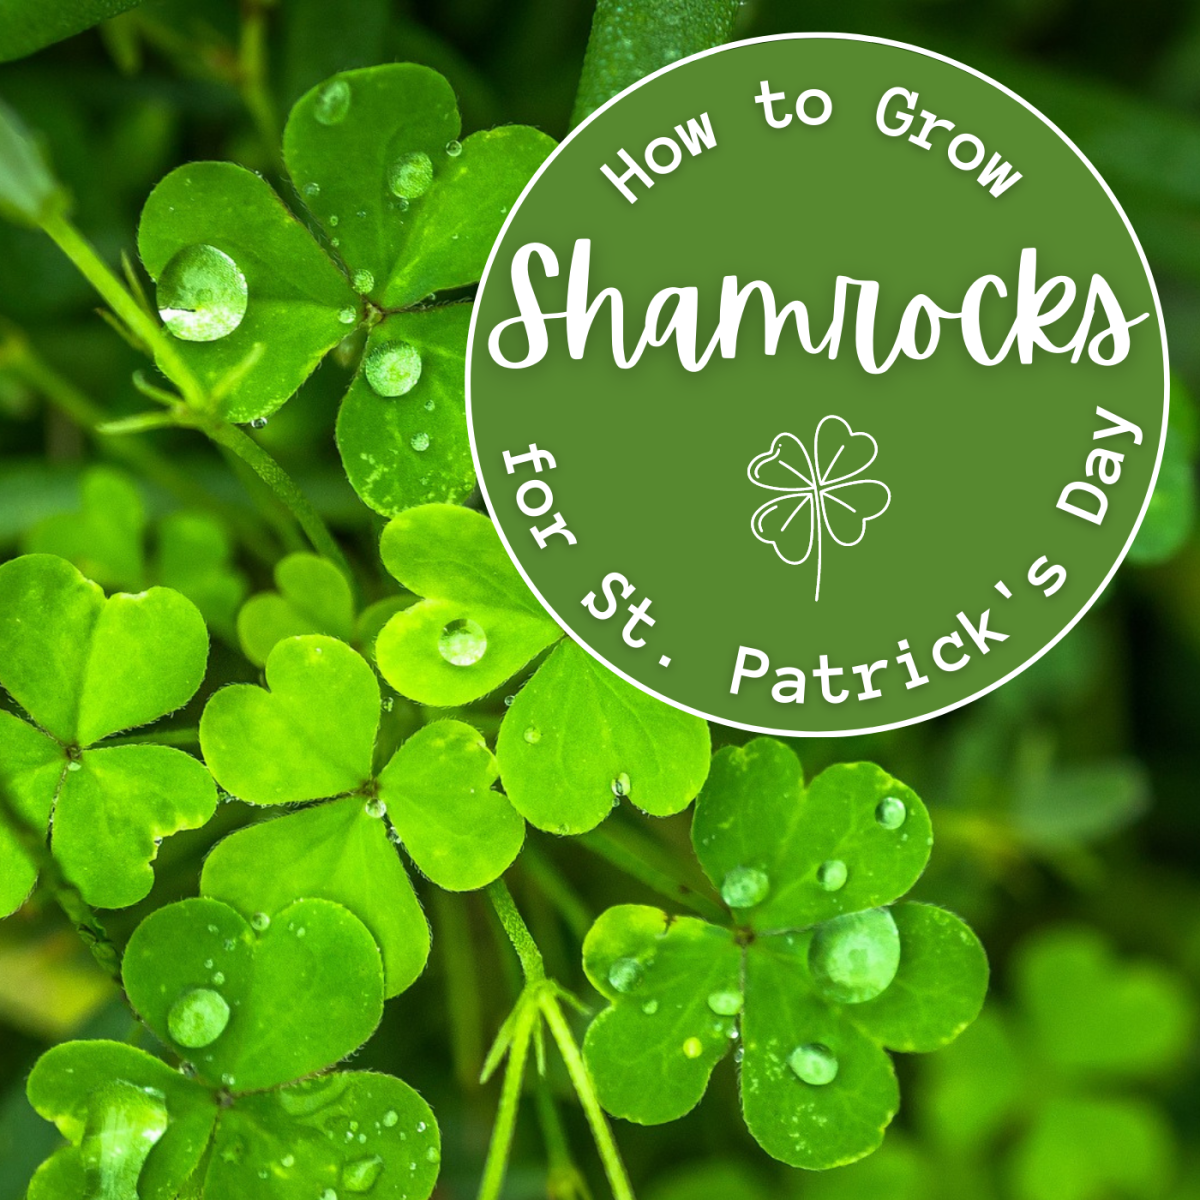 How to Grow Shamrocks for St. Patrick's Day